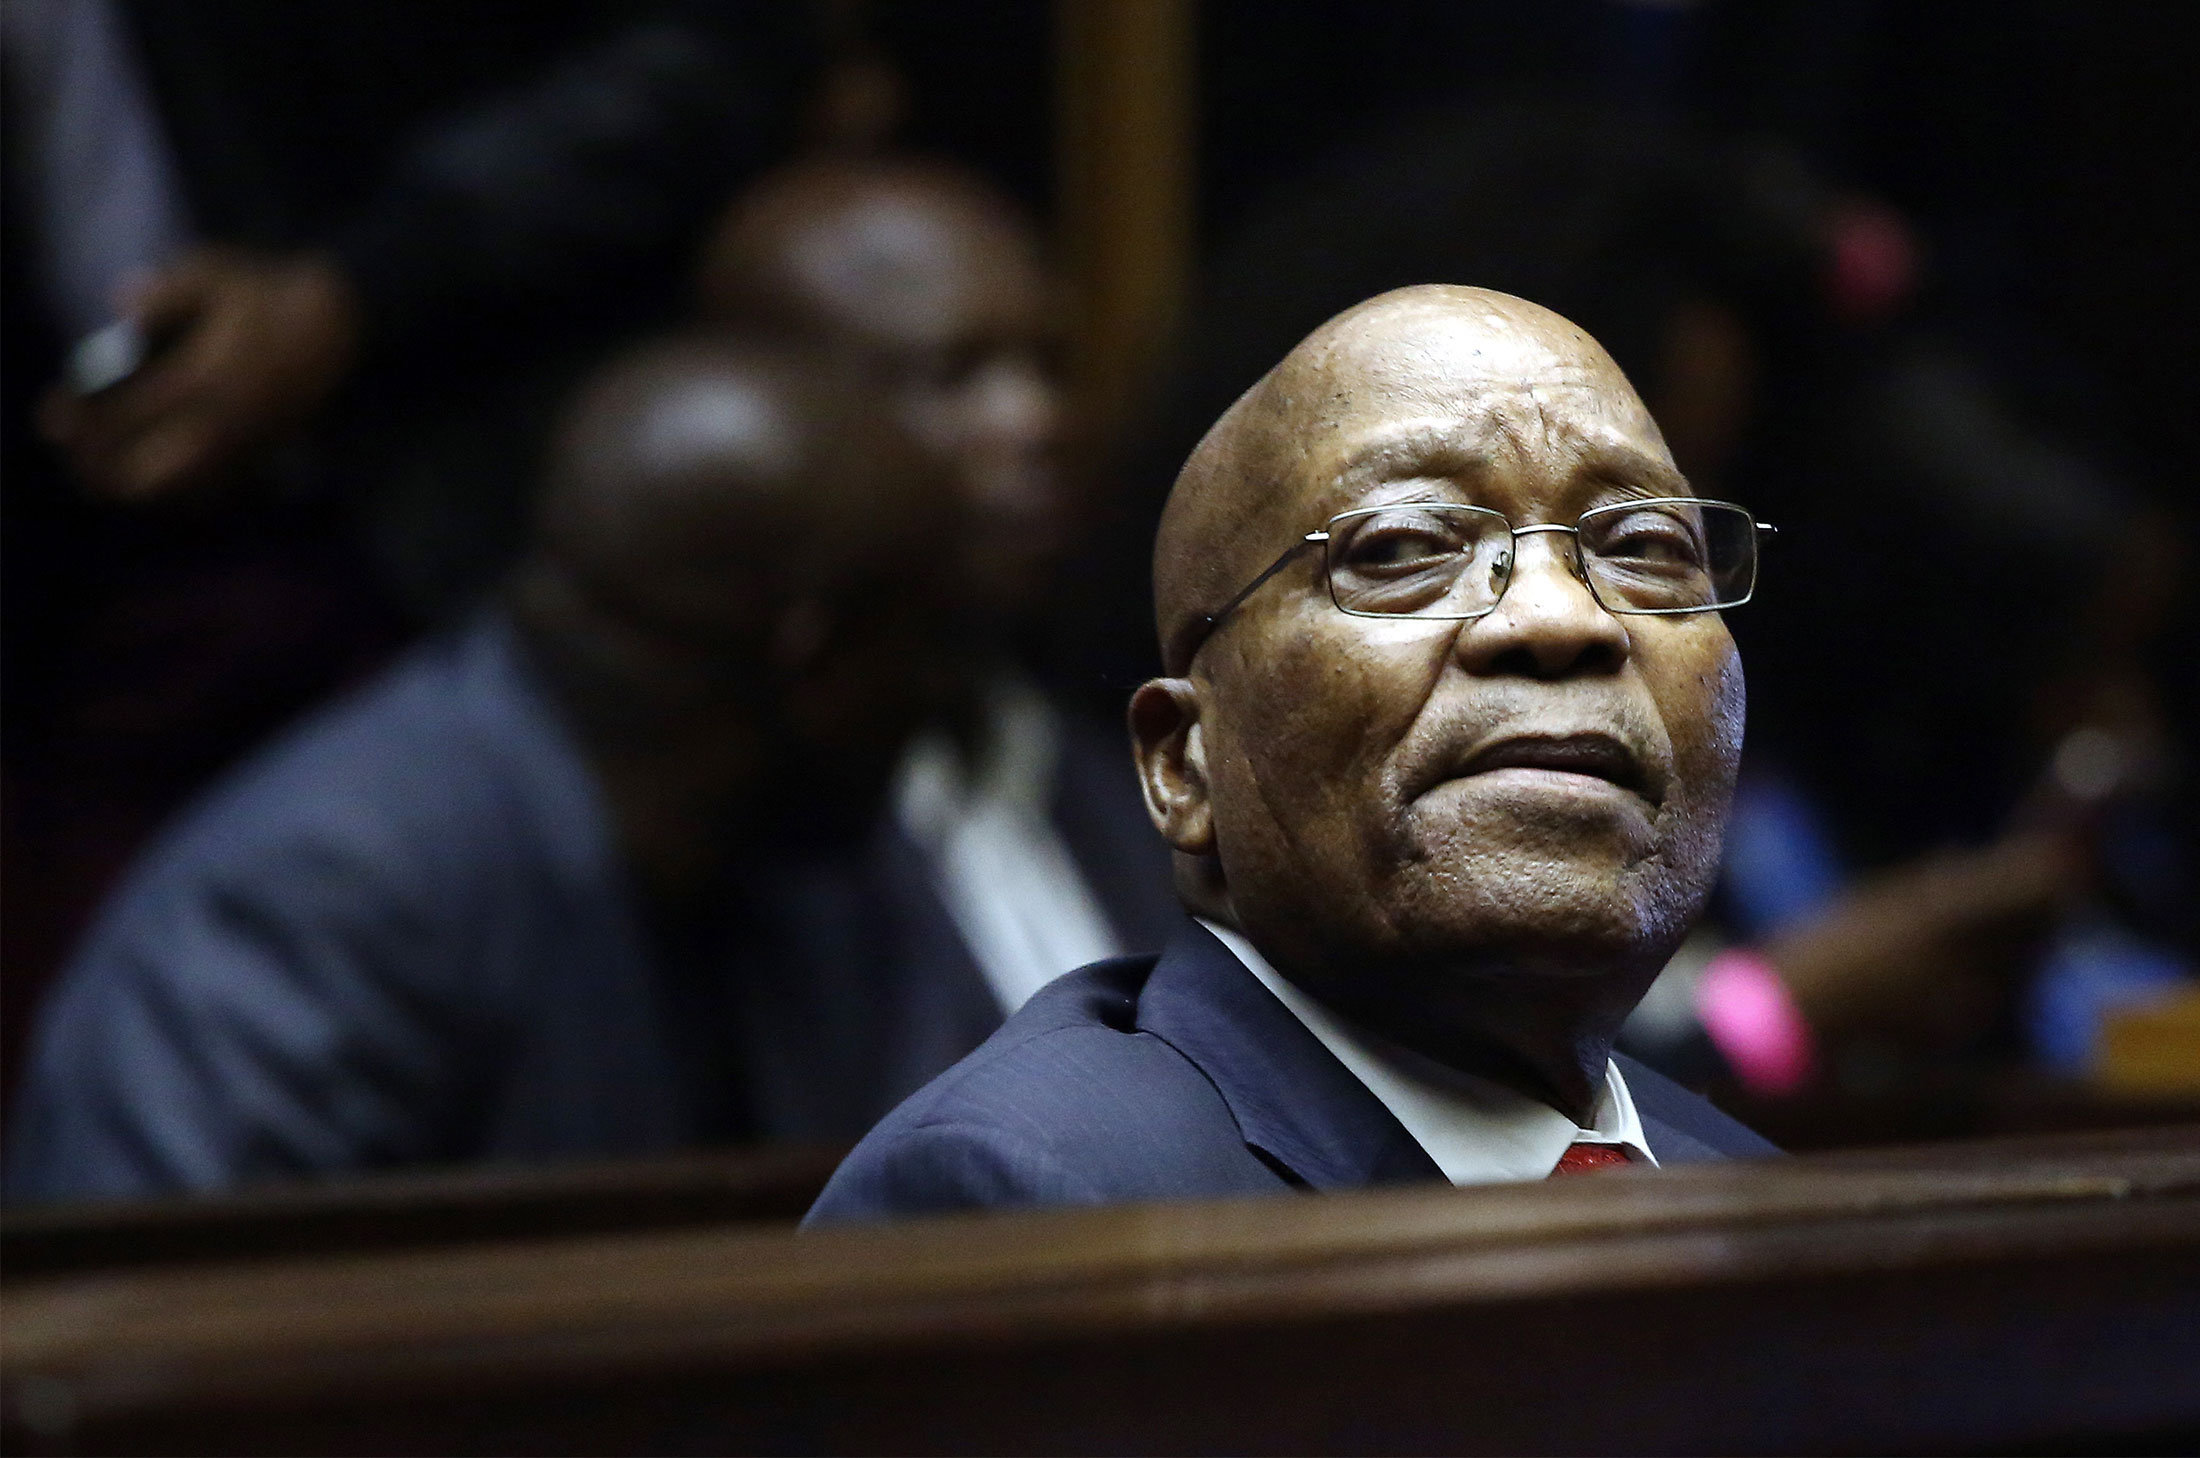 Ex-South African President Zuma Will Face Trial for Corruption - Bloomberg